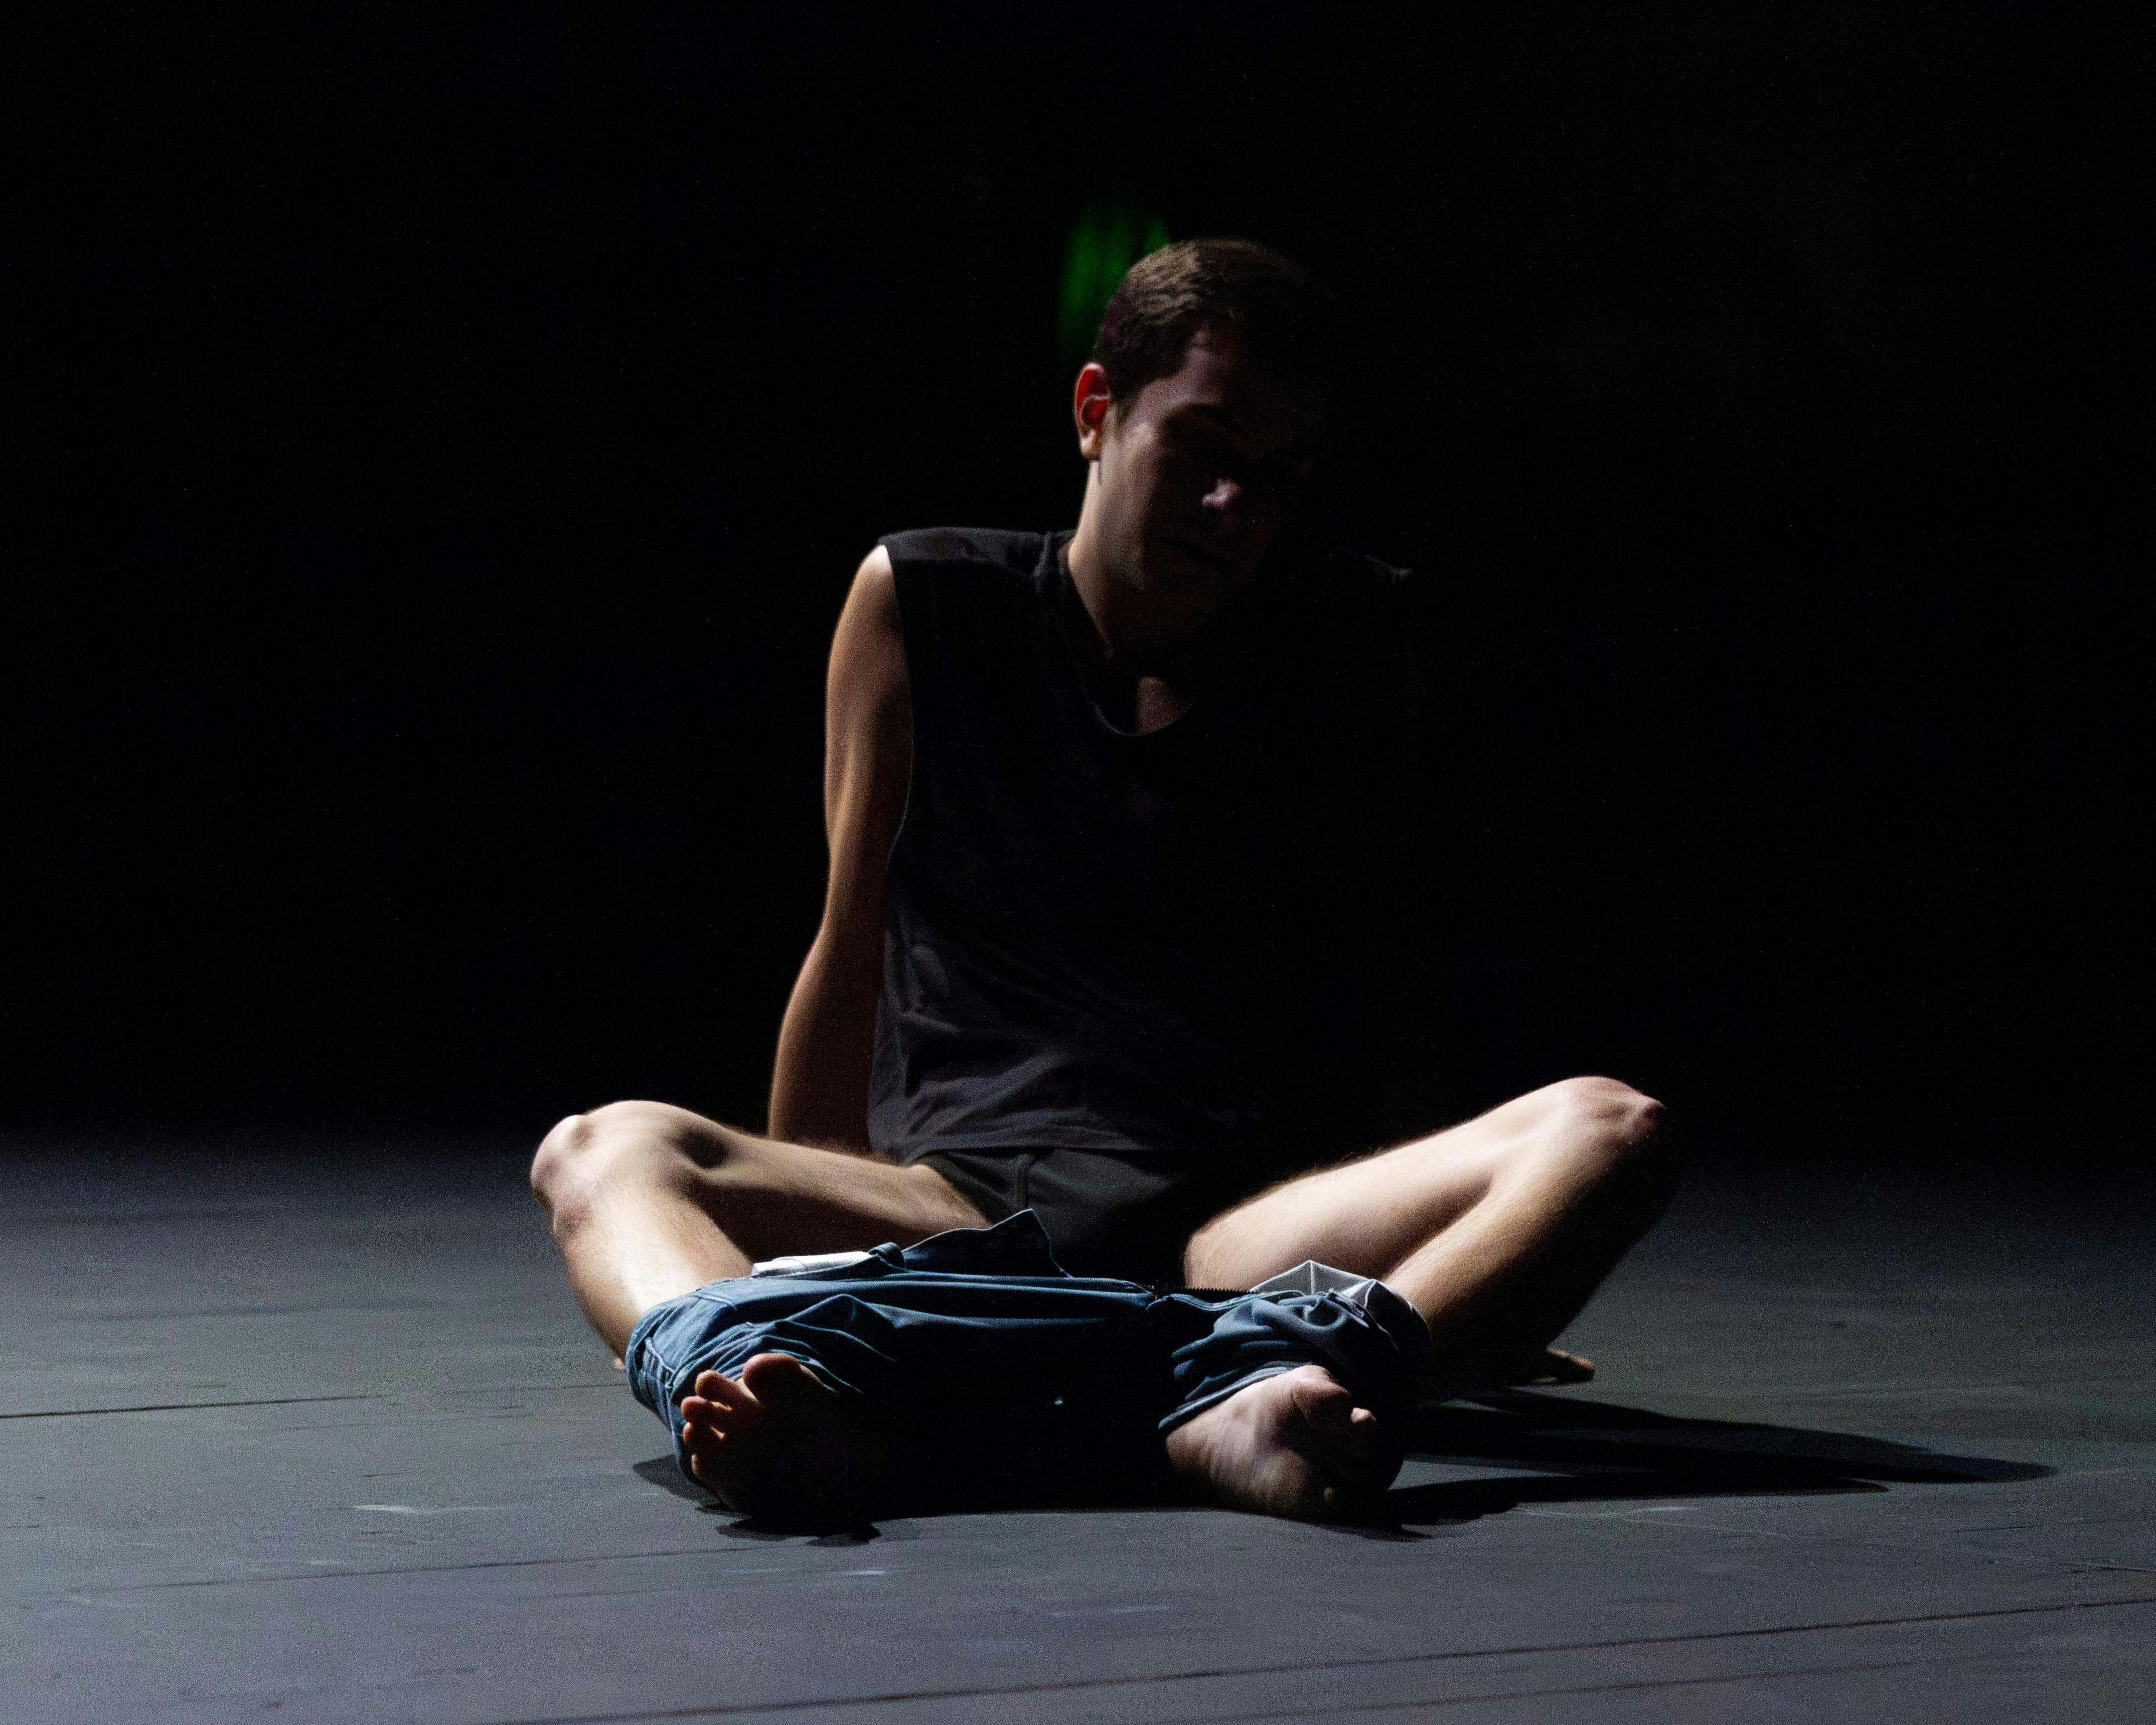 Performer sitting on the floor in the half-light, legs slightly apart; wearing a black shirt and pants pulled down to ankle level.